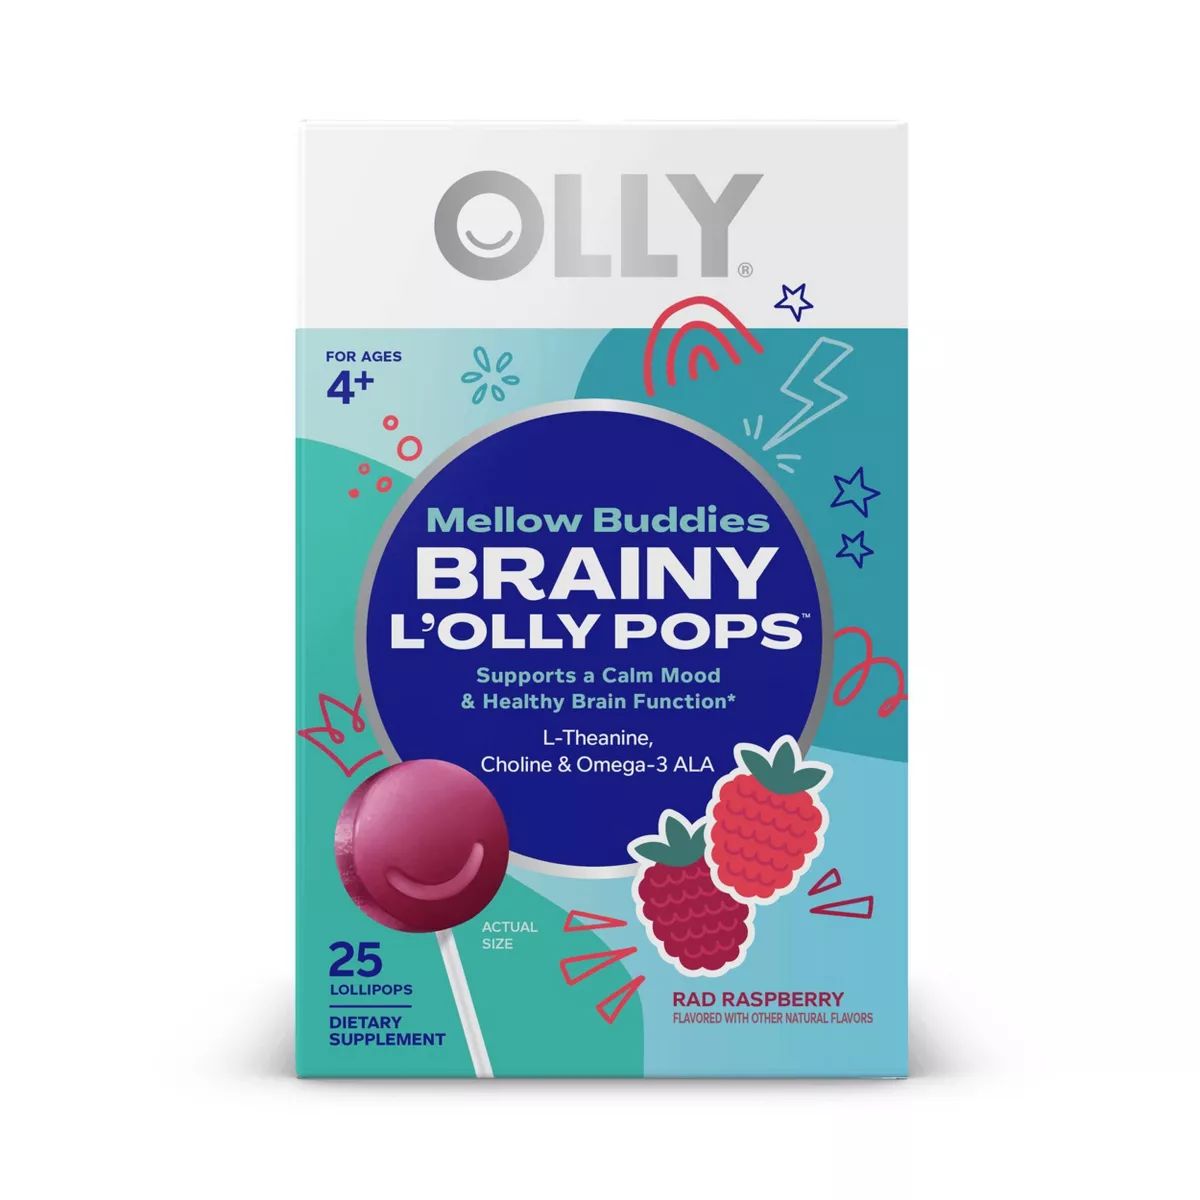 OLLY Brainy L'OLLY Pops - Mellow Buddies - 25ct | Target